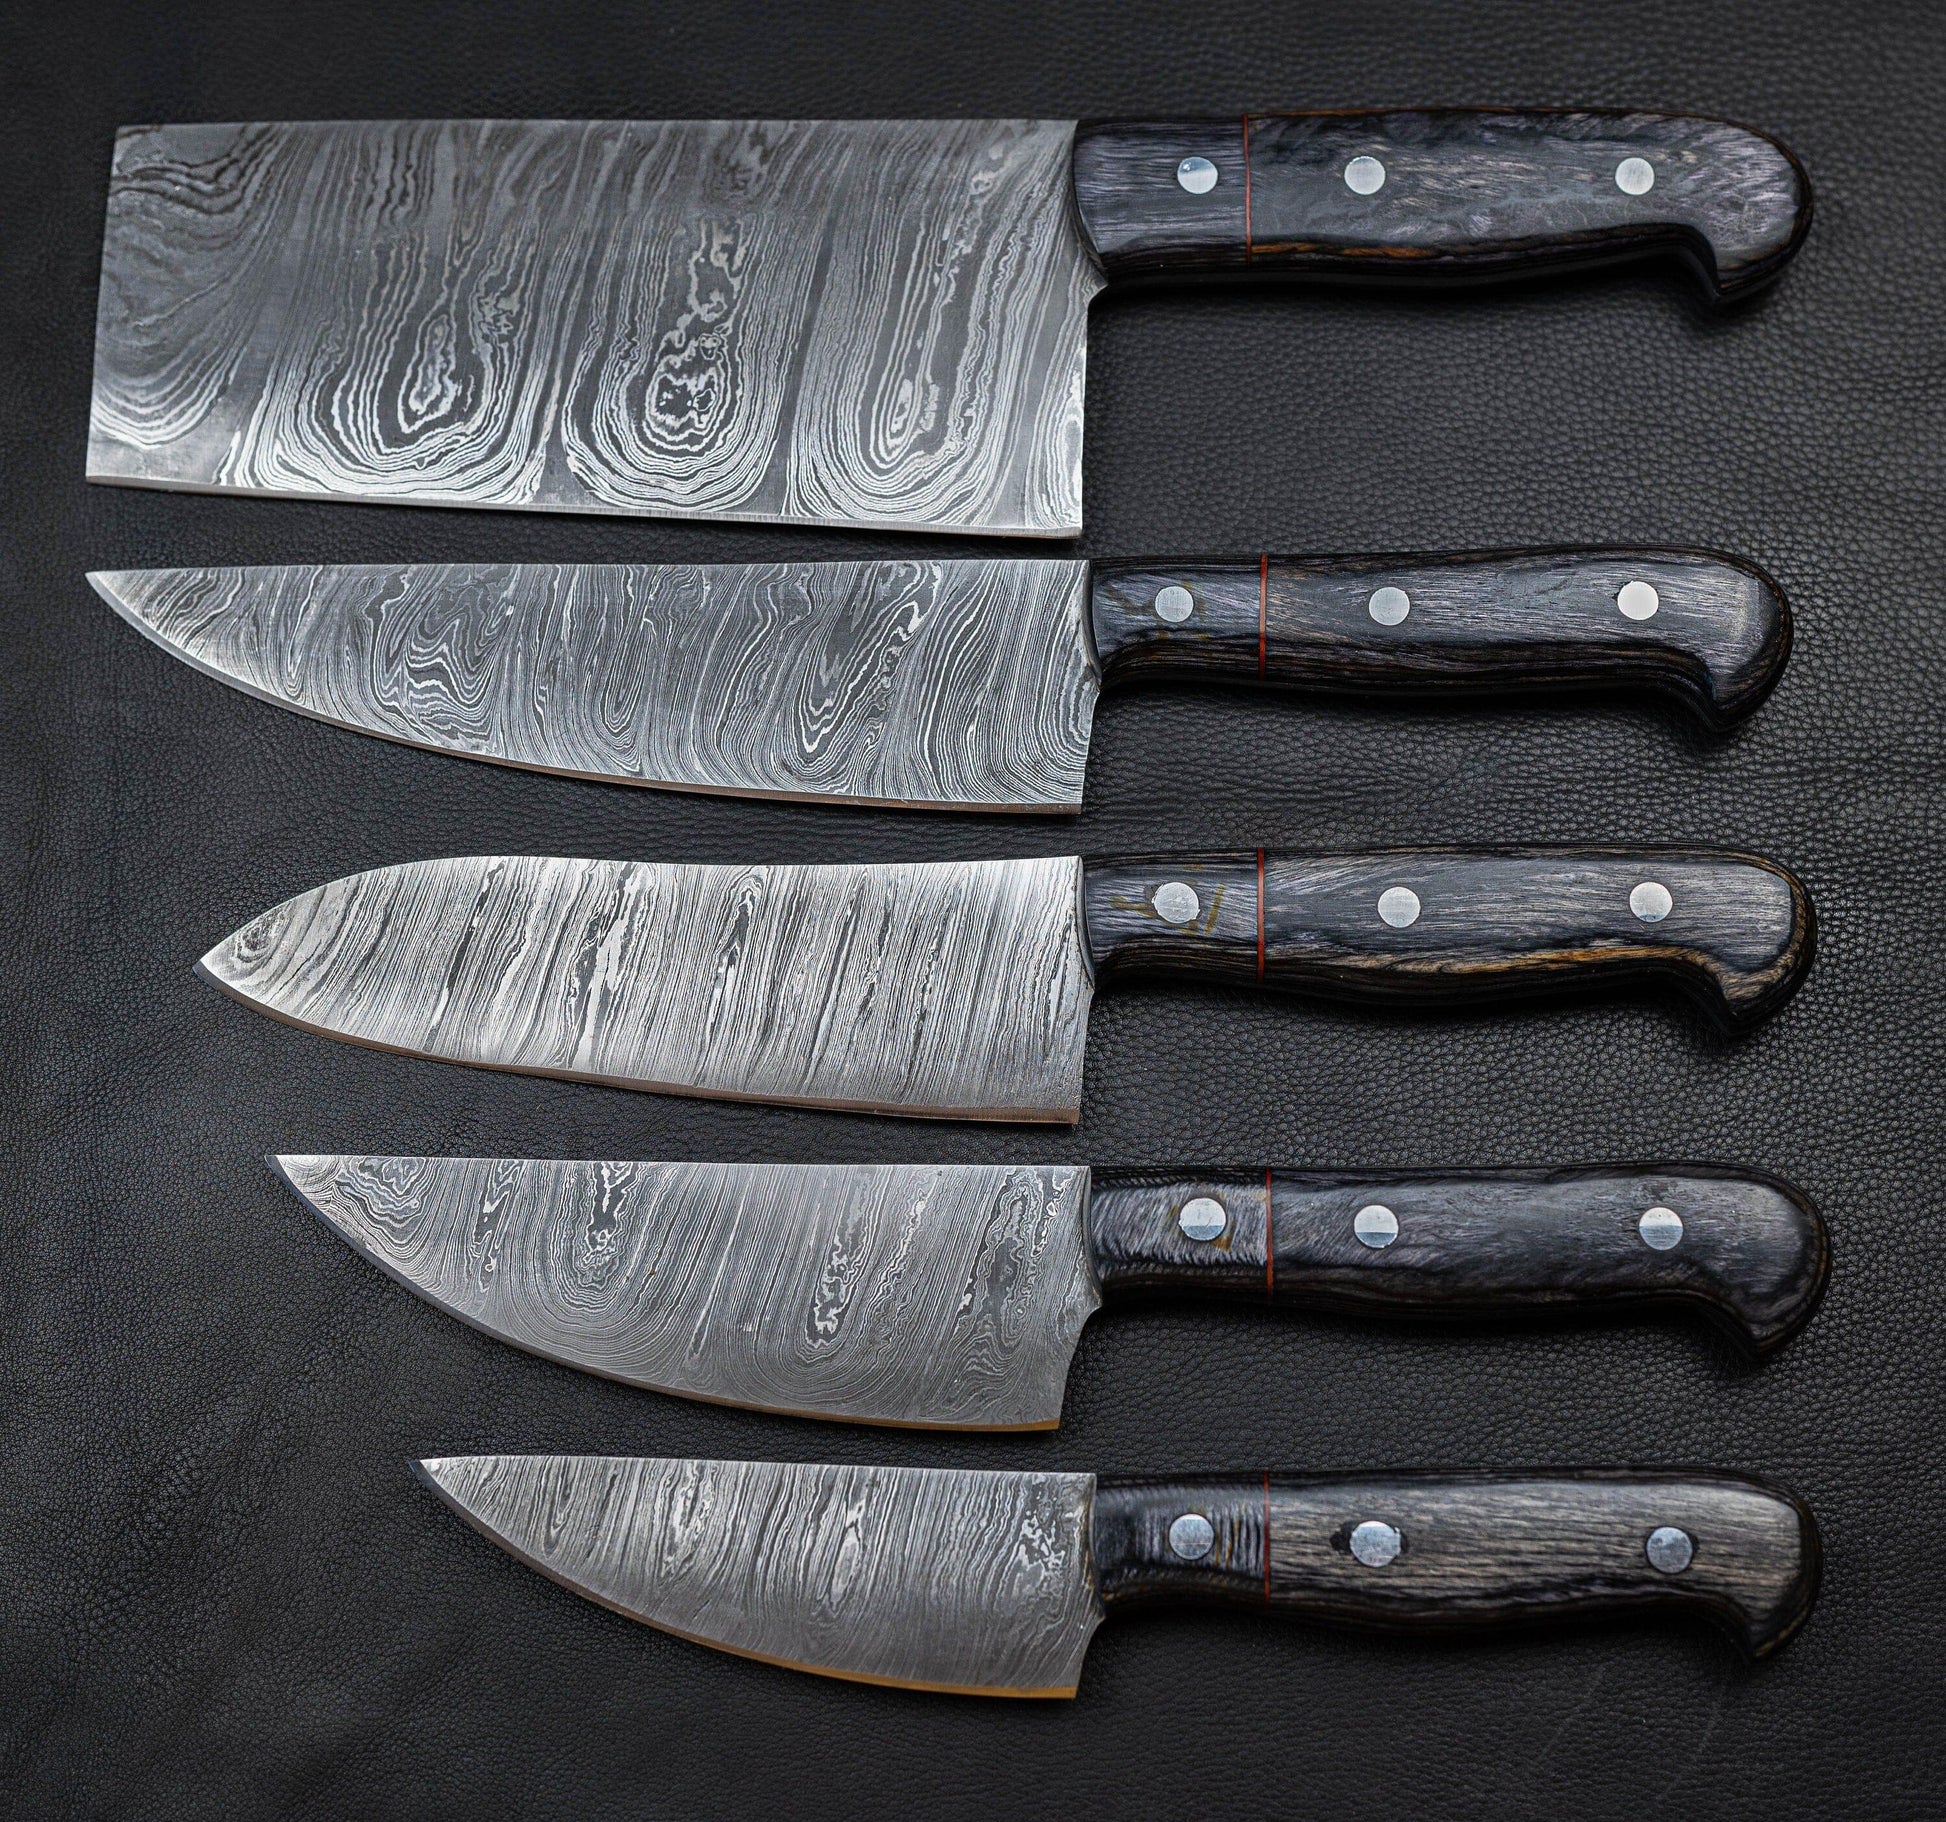 Chef Knife Set, Handmade Damascus Steel Knives, Beautiful Gift for